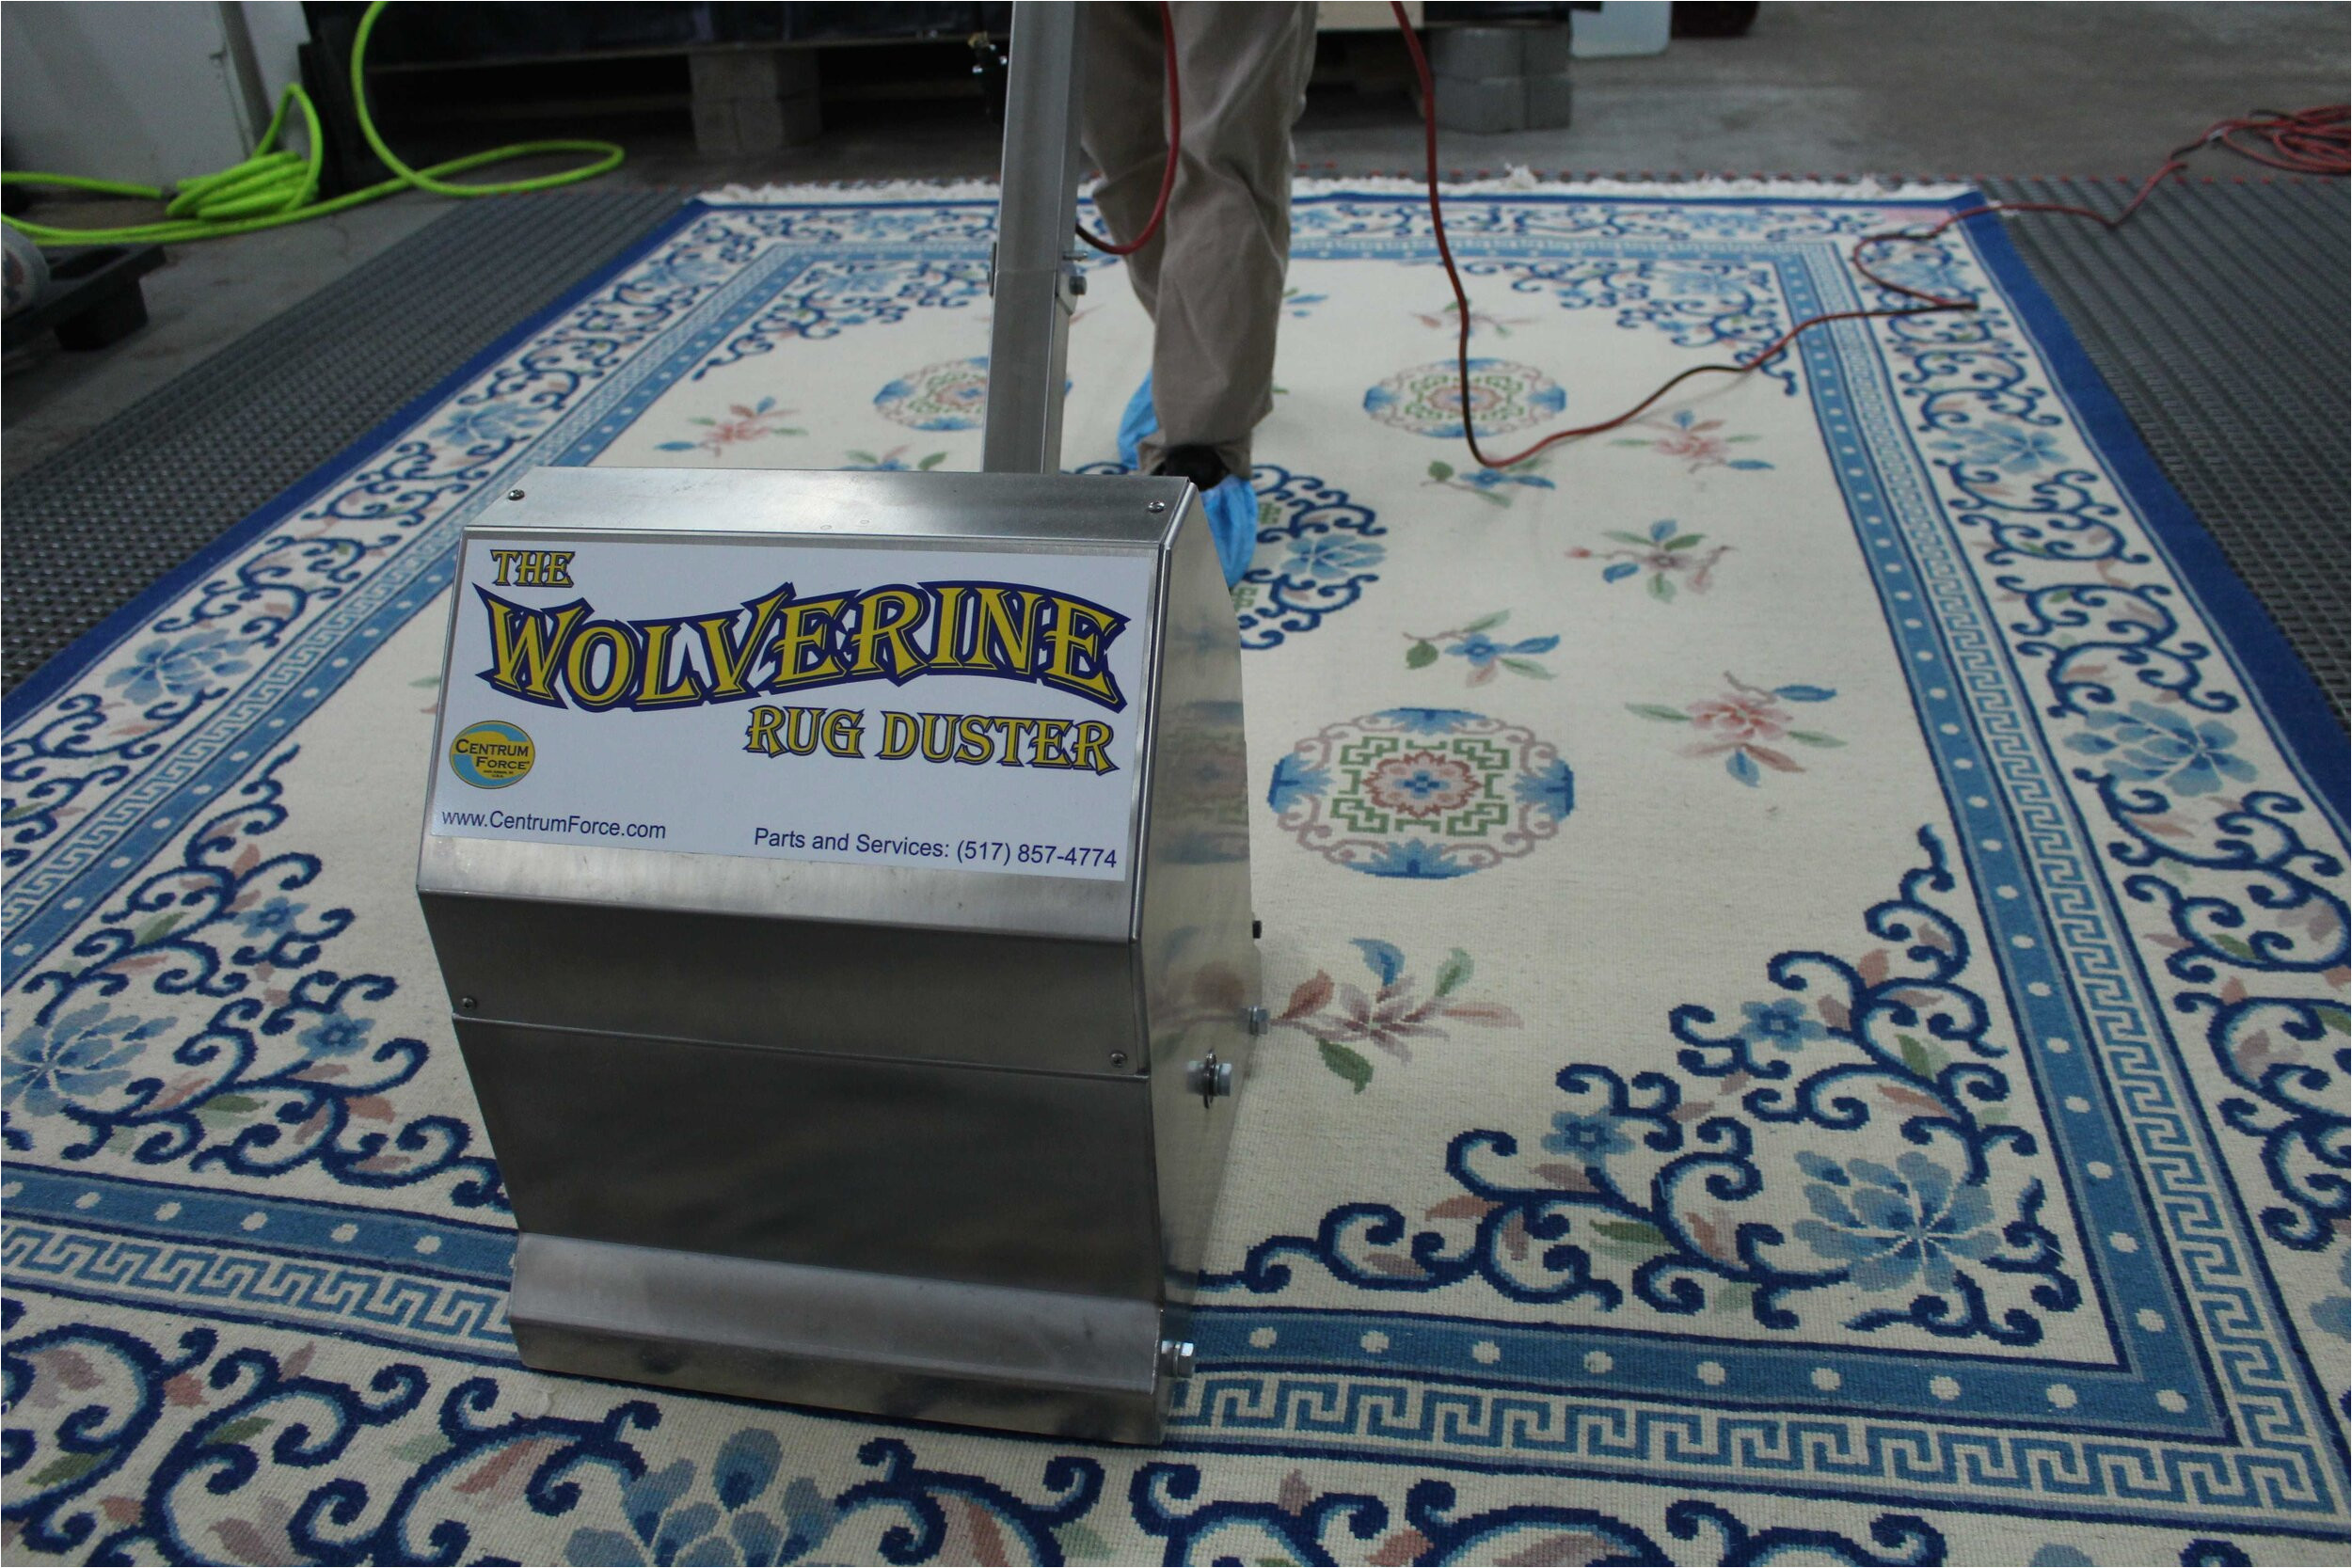 Area Rug Cleaning Pick Up Near Me area Rug Cleaning Drop Off and Pick Up Service â Sno-king Carpet …